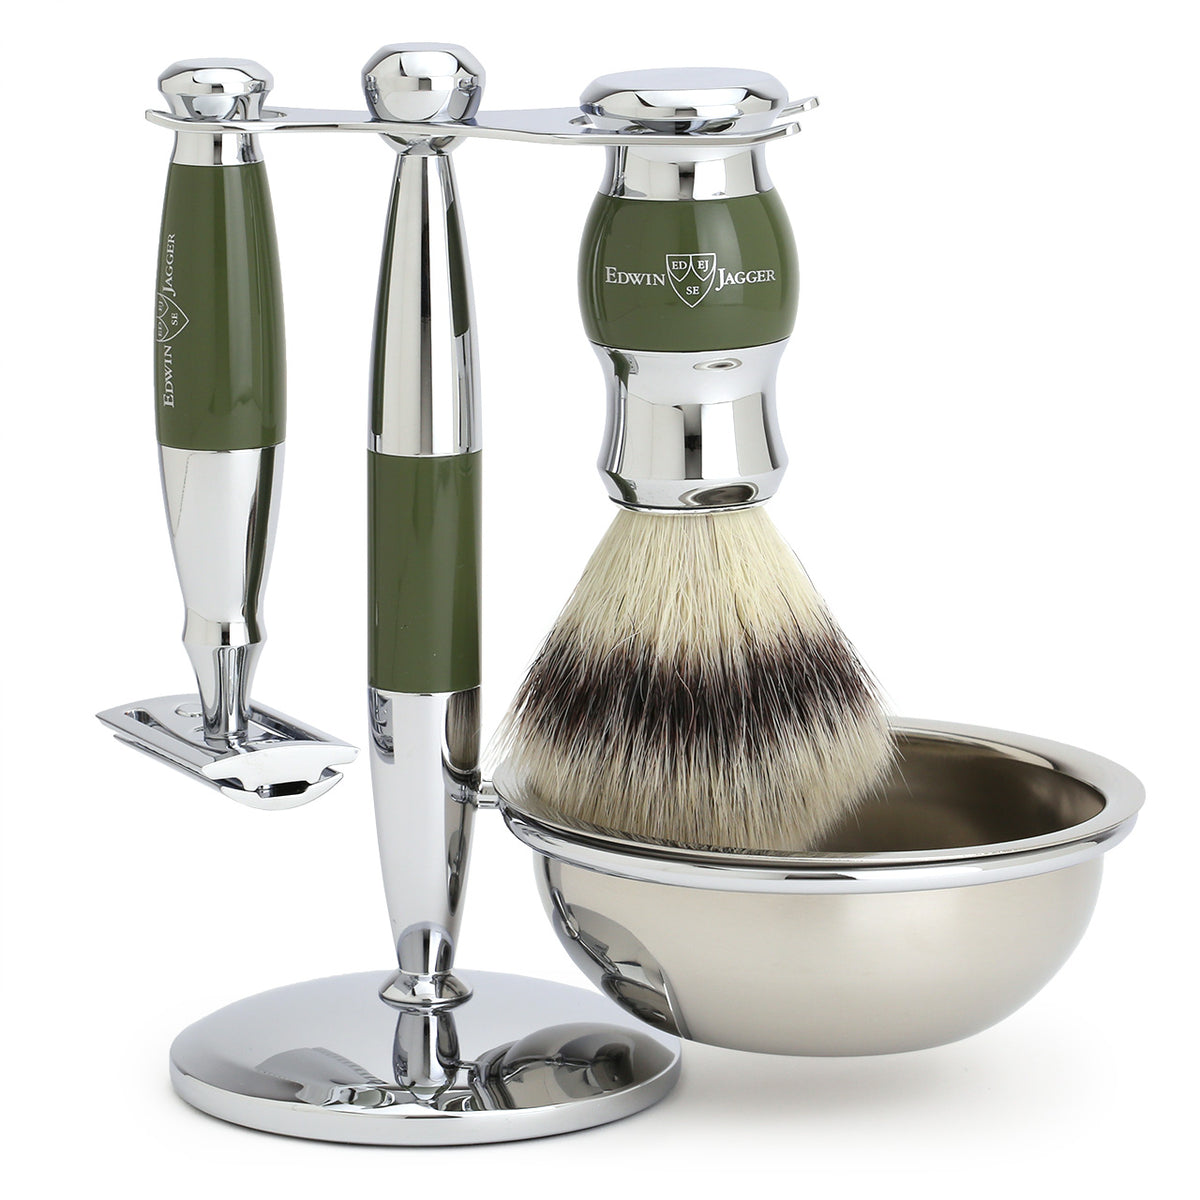 Edwin Jagger Shaving Set with Shaving Brush, Safety Razor, Stand and Soap Bowl - Olive Green